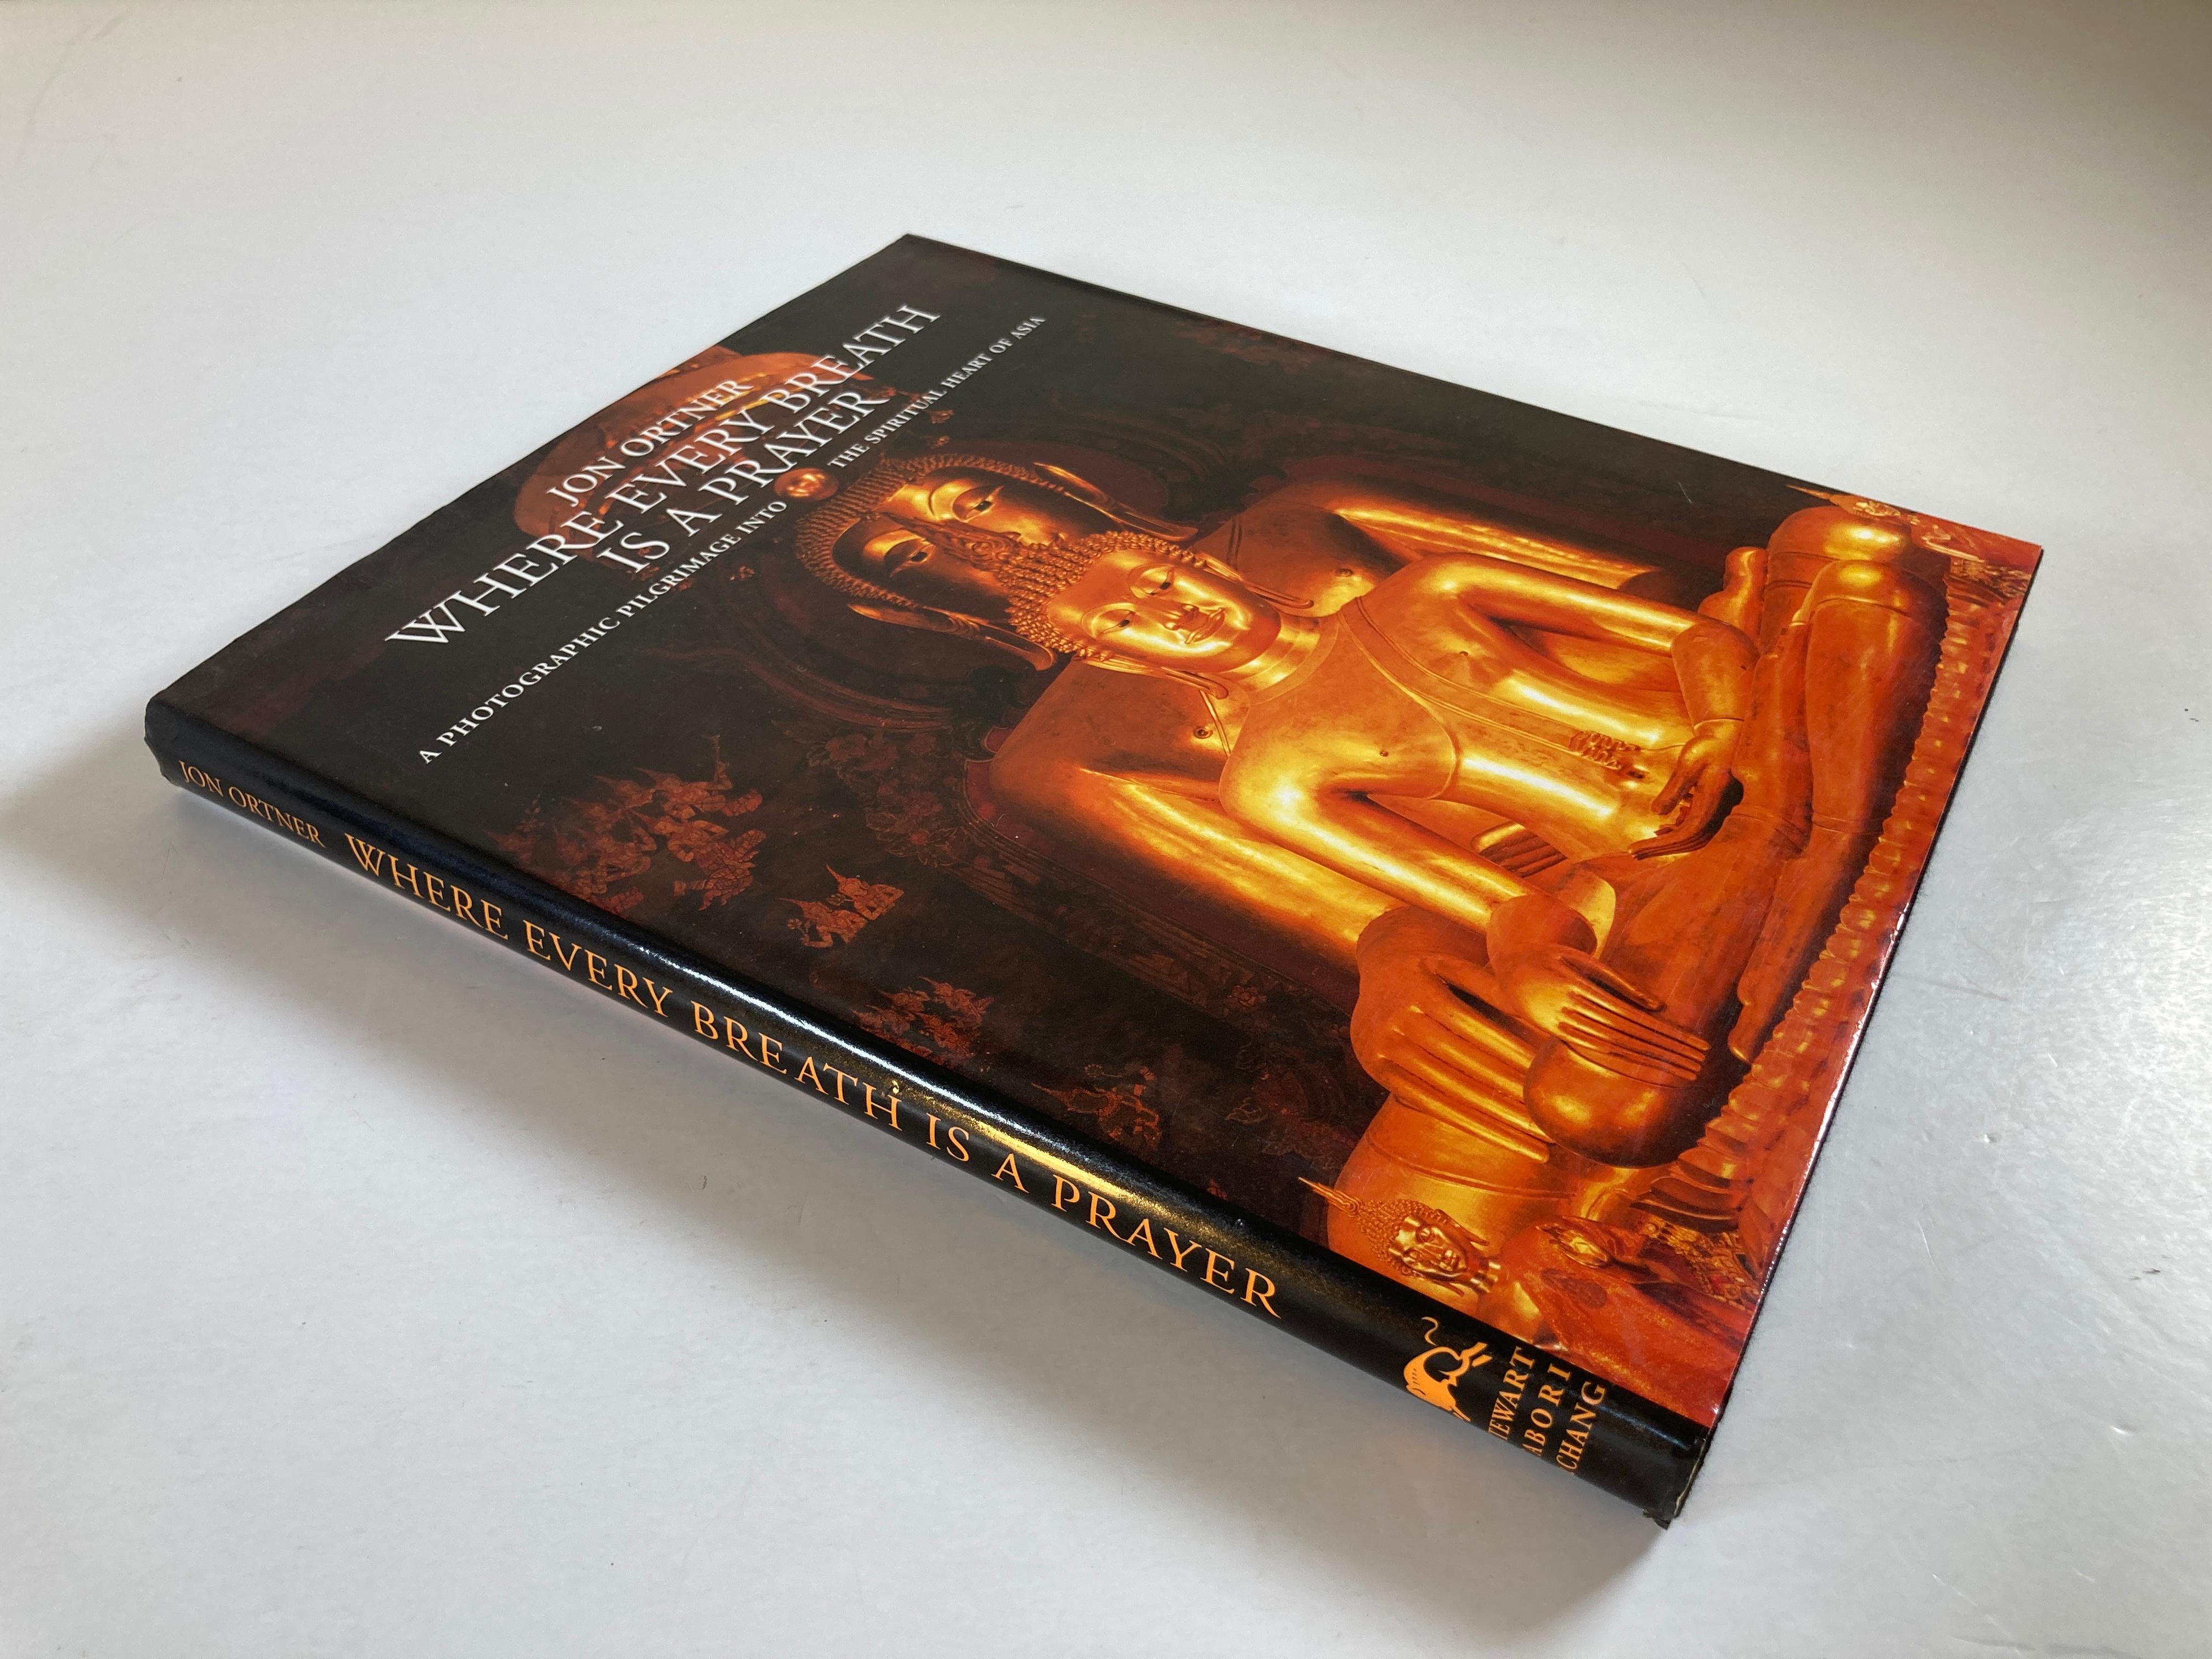 Where Every Breath Is A Prayer: A Photographic Pilgrimage Into The Spiritual Heart Of Asia
By Jon Ortner
This is a beautiful large coffee table book.
Edition first edition
Binding hardcover
PublisherStewart, Tabori & Chang
Place Of